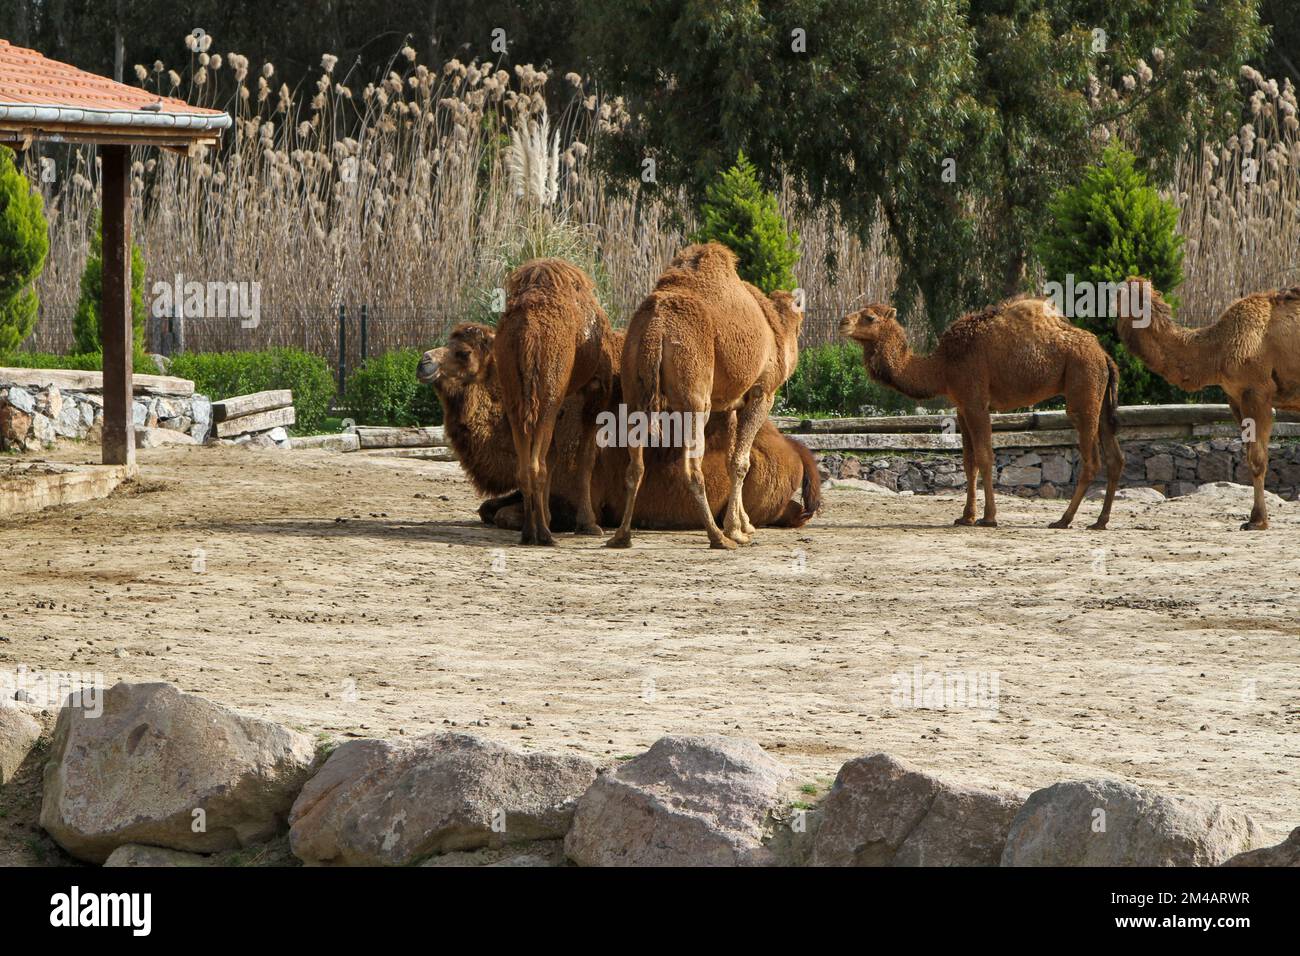 İzmir, Turkey - March 31 2013: many brown camels, in the zoo Stock Photo